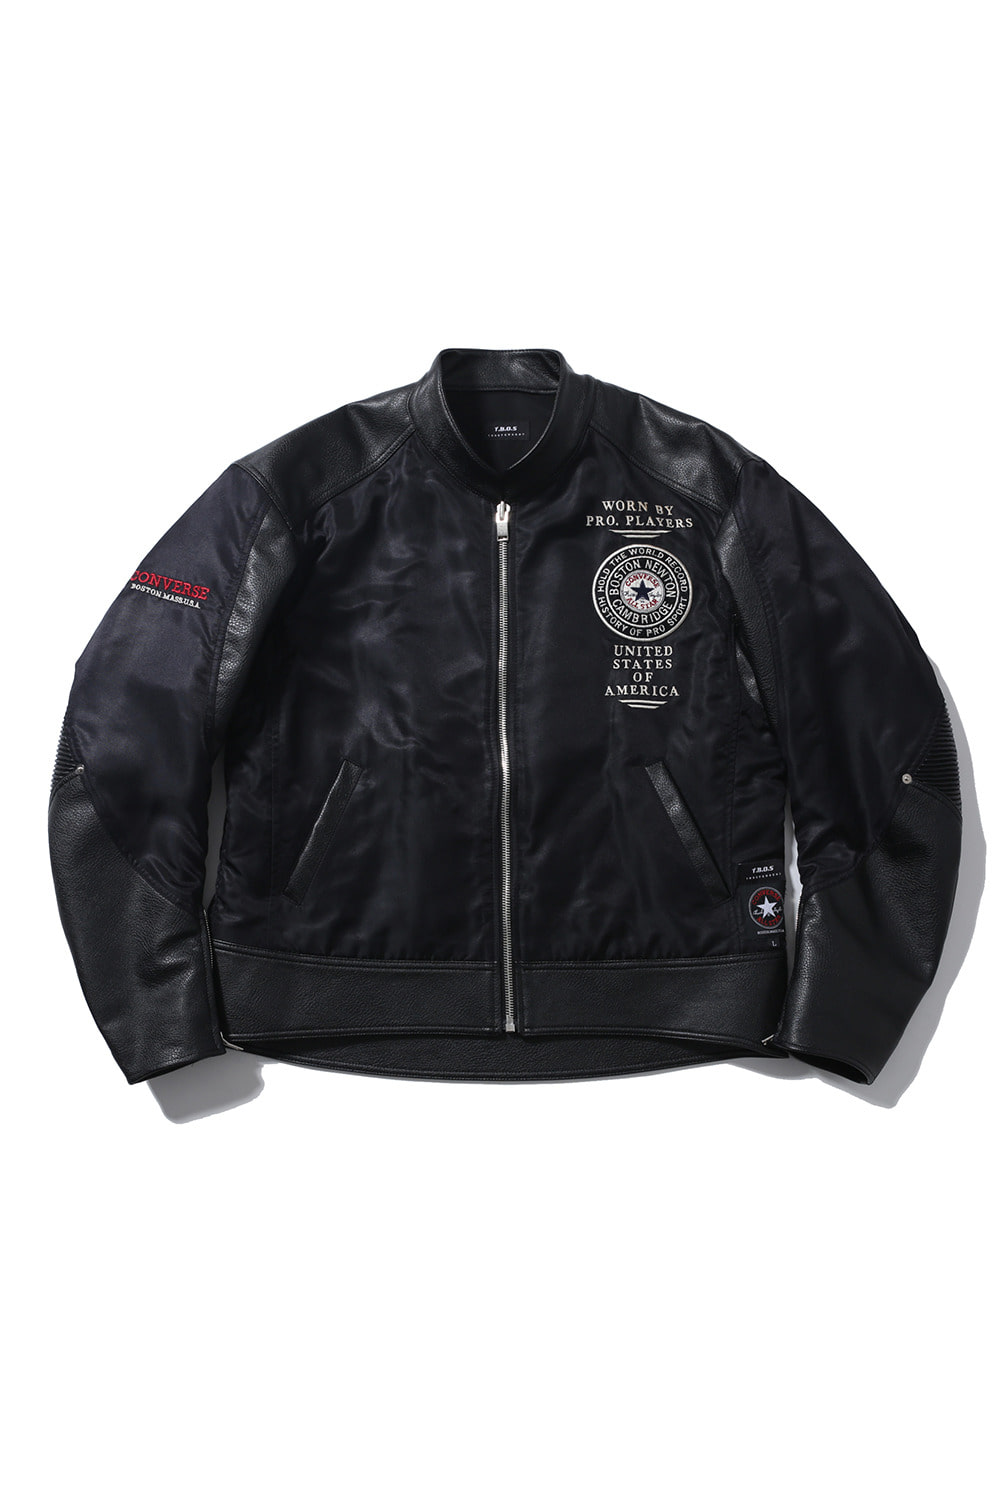 T.B.O.S x CONVERSE Restructured Racing Jacket 002